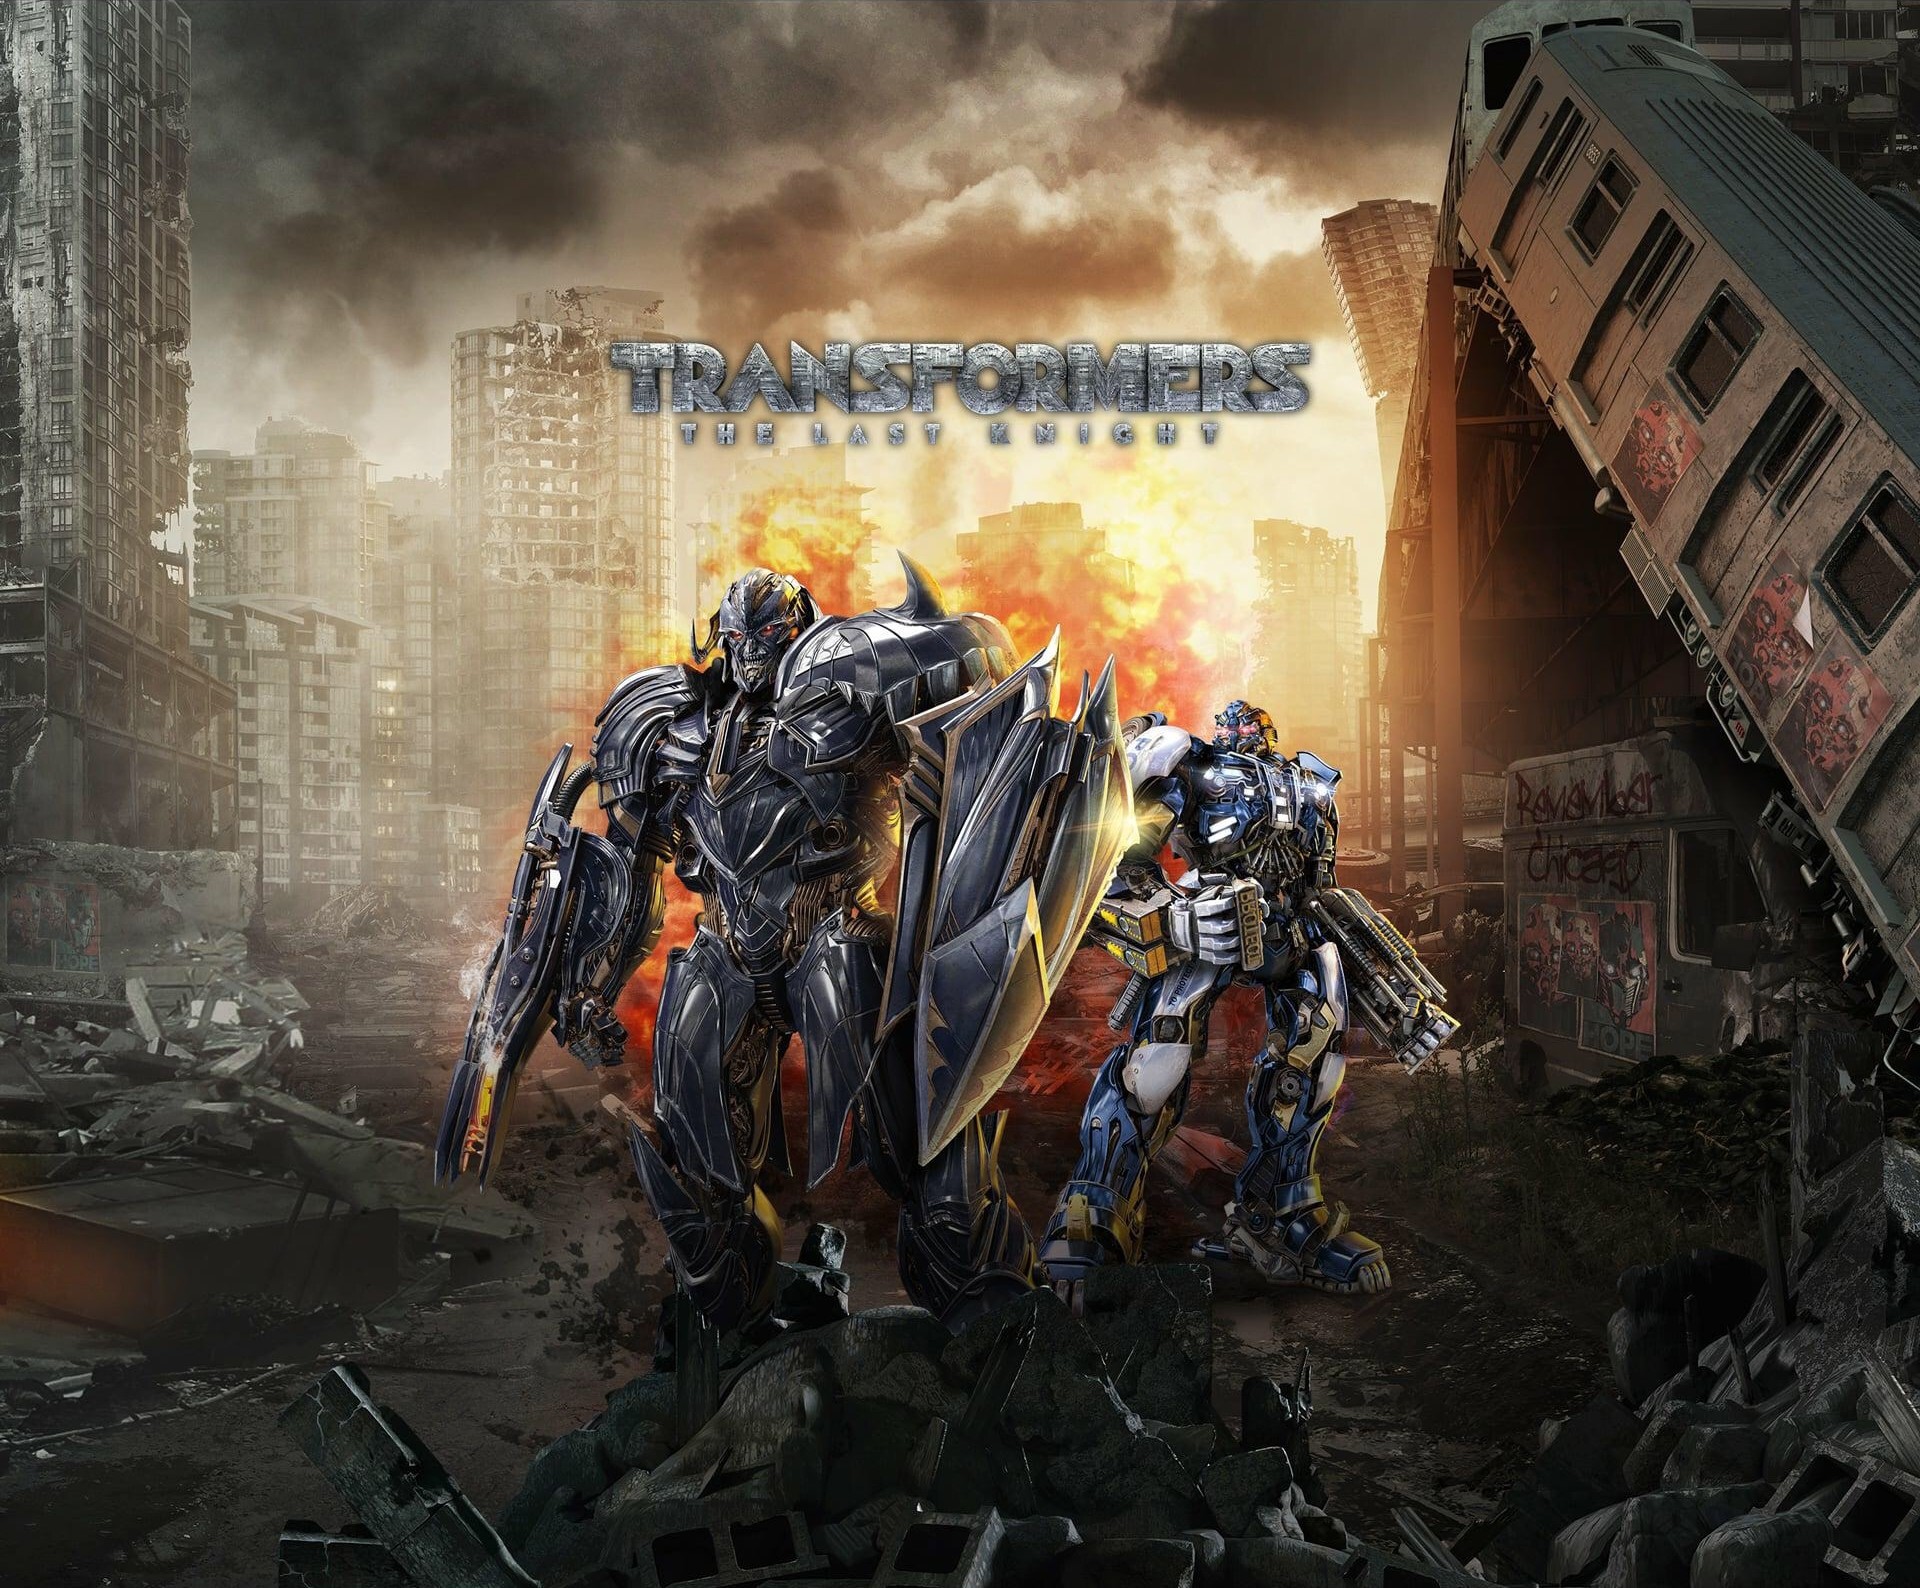 1920x1588 The official app for Transformers: The Last Knight has just been released  on Apple's App